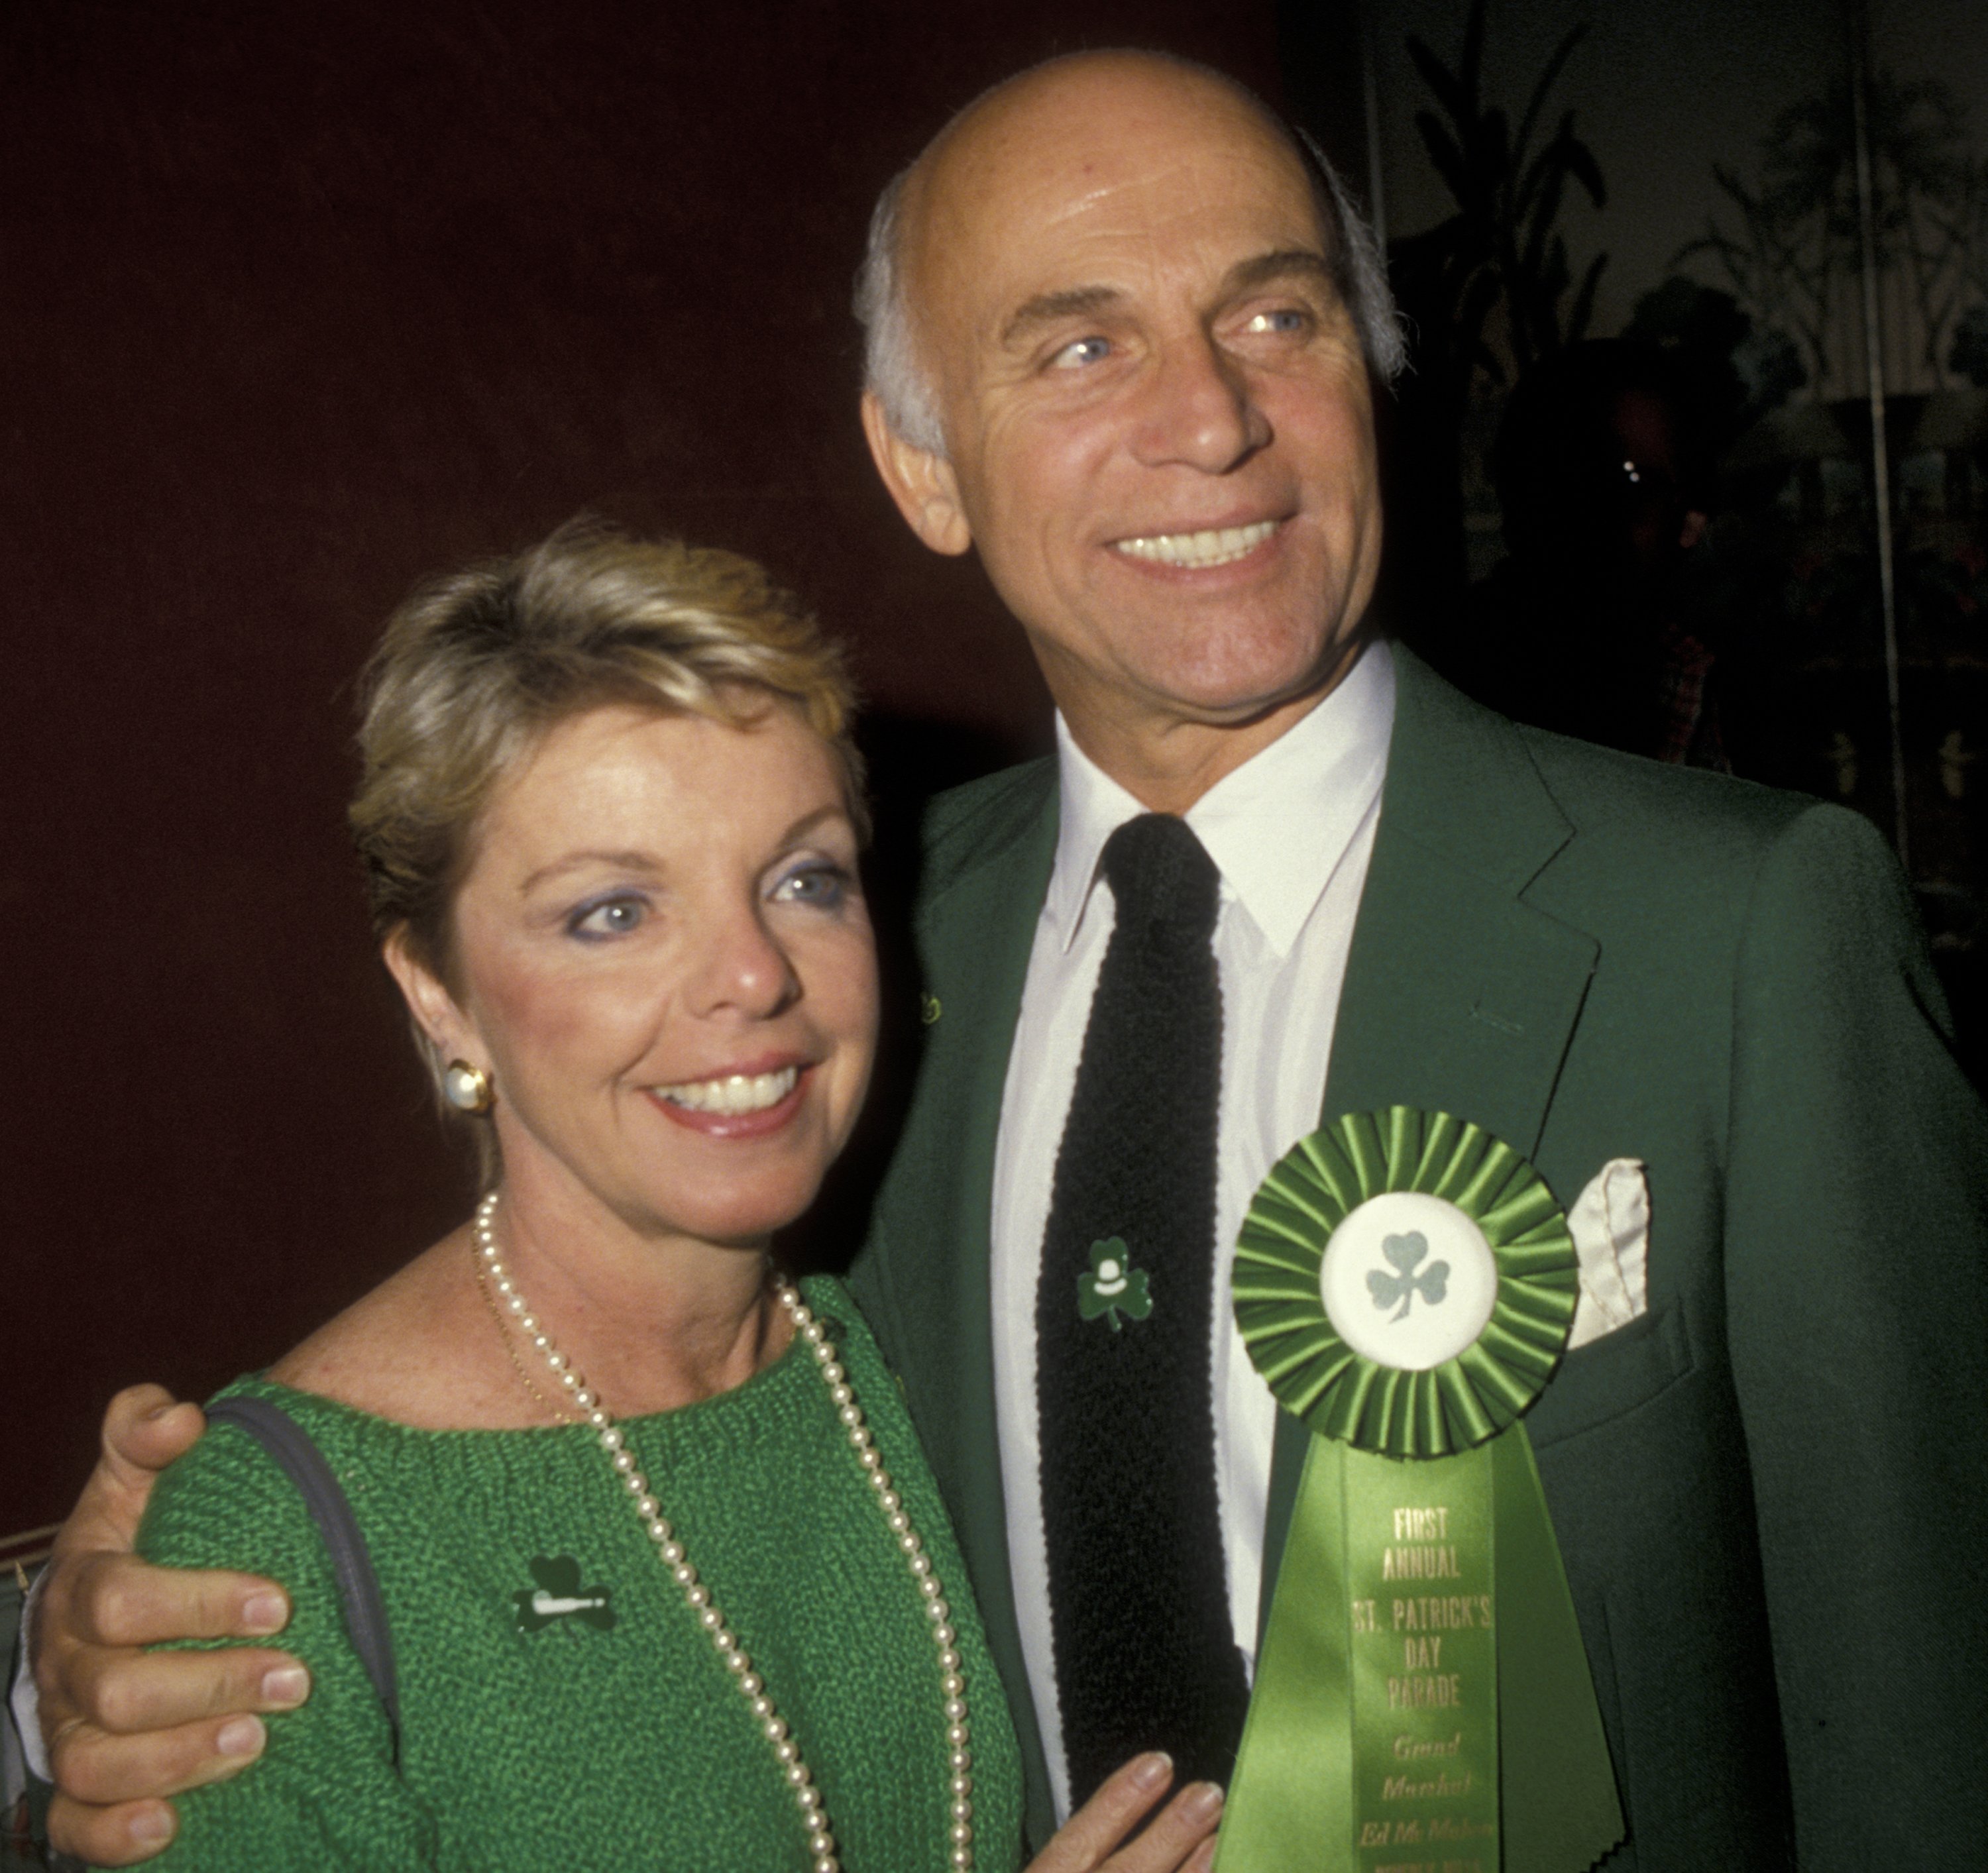 Gavin MacLeod and Patti MacLeod pictured at First Annual St. Patrick's Day Parade in 1985 at Jimmy's Restaurant, Beverly Hills. | Photo: Getty Images